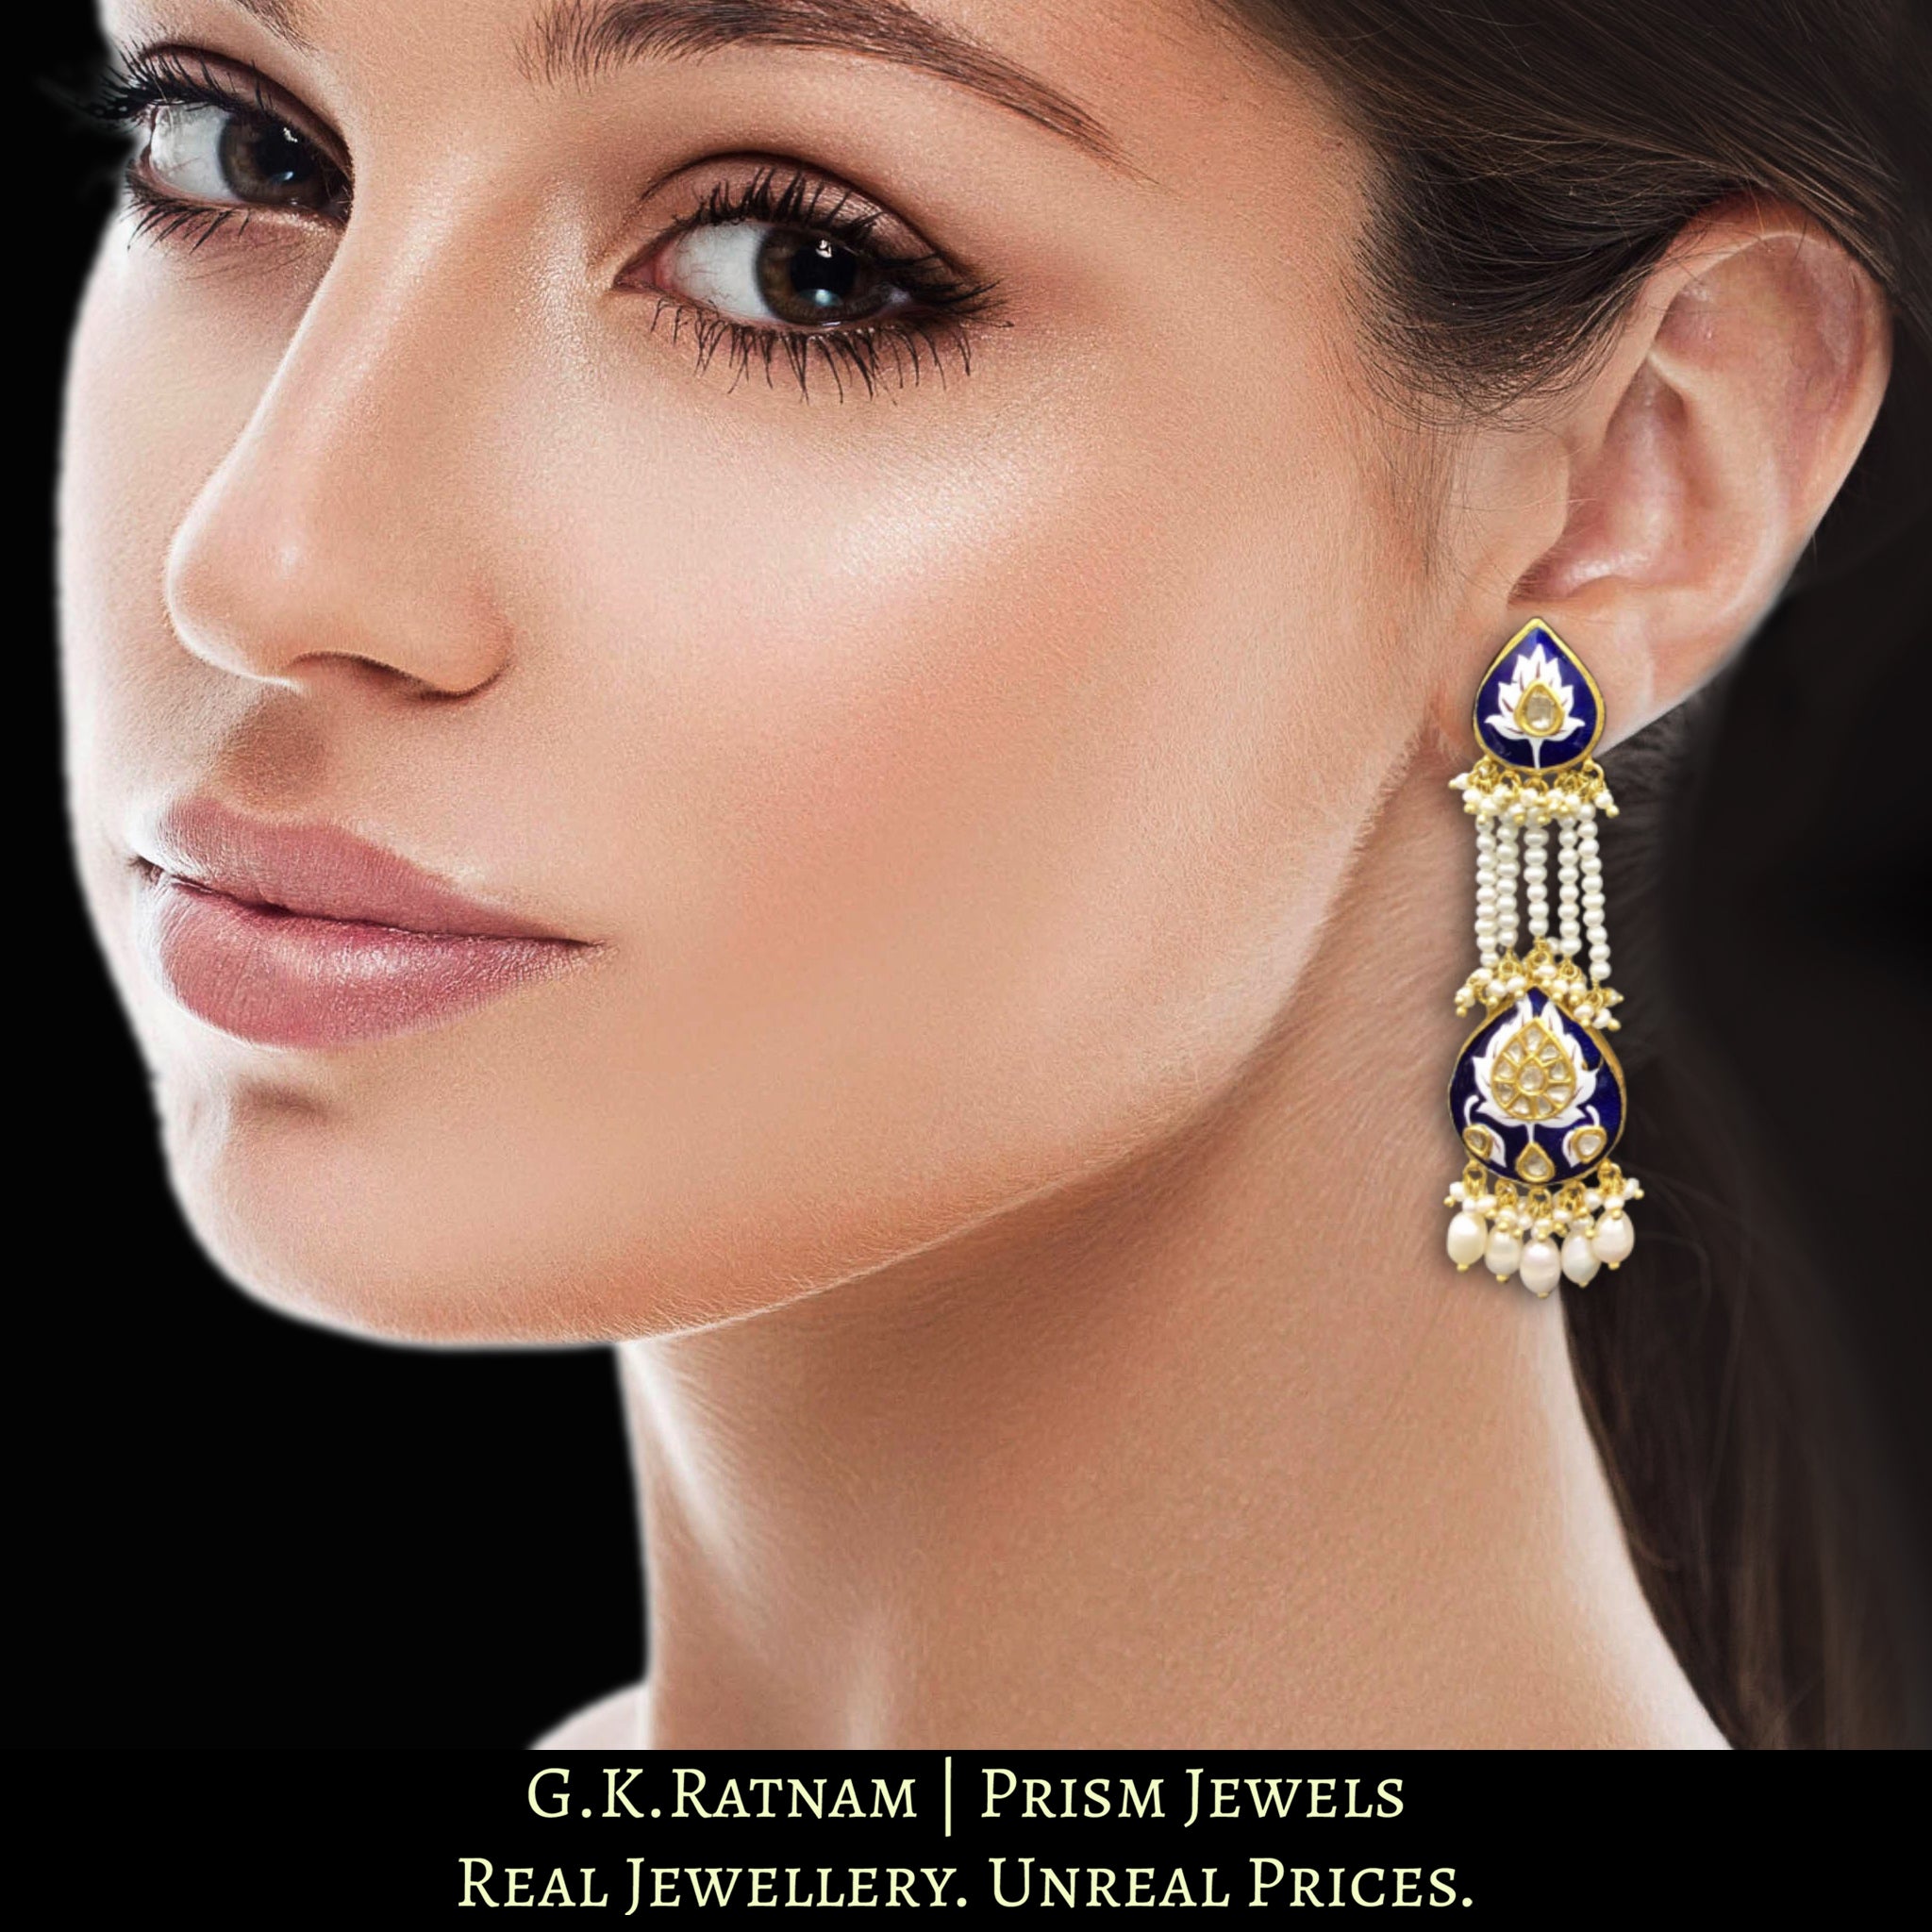 23k Gold and Diamond Polki Long Earring Pair with intricate blue pottery and natural freshwater pearls